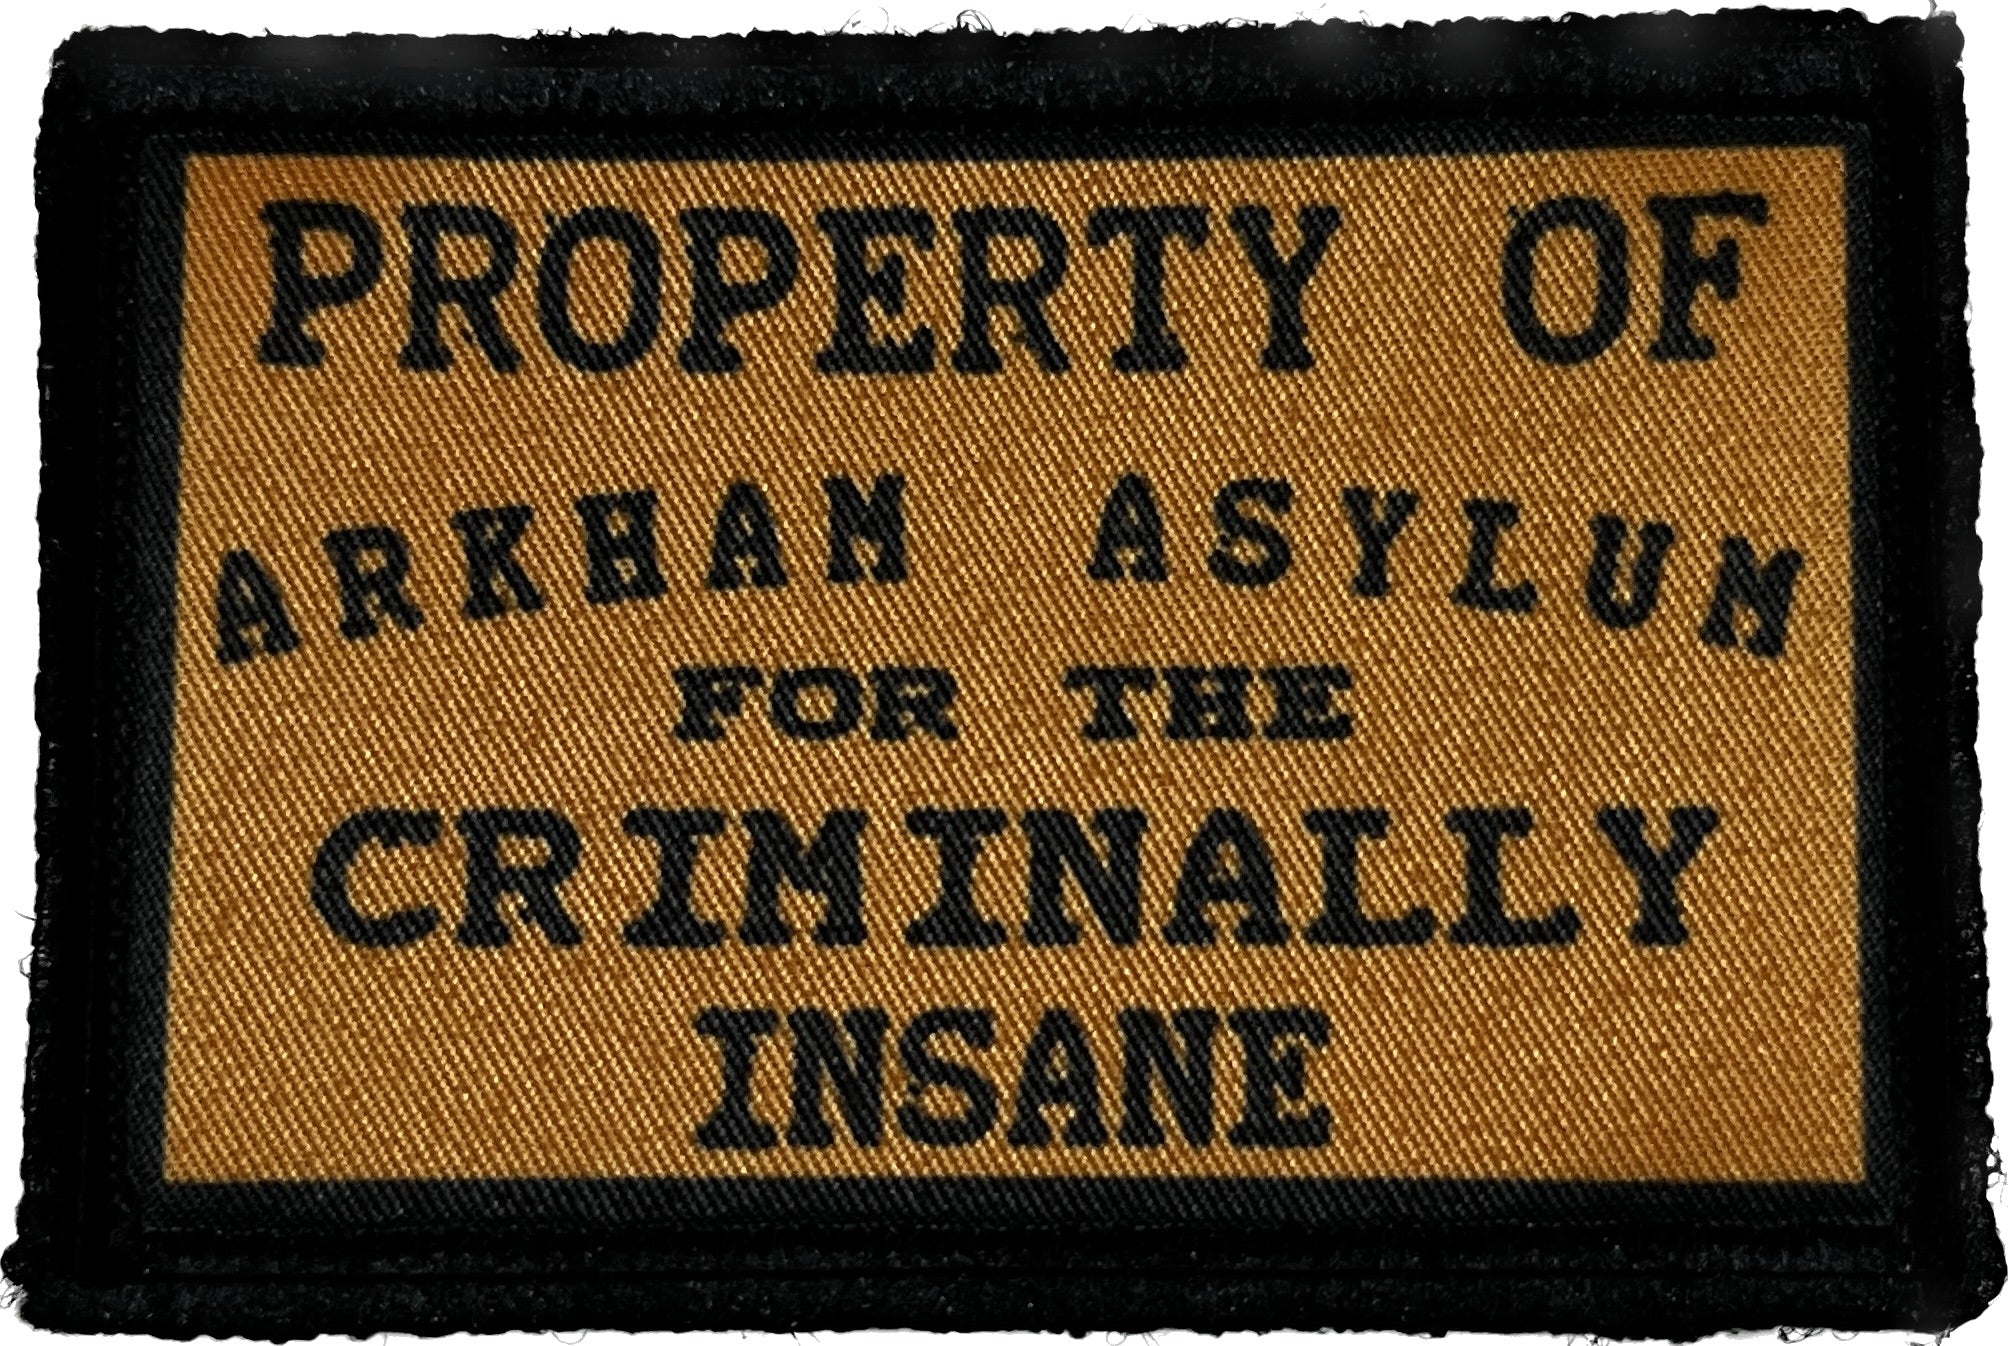 Property of Arkham Asylum Morale Patch Morale Patches Redheaded T Shirts 